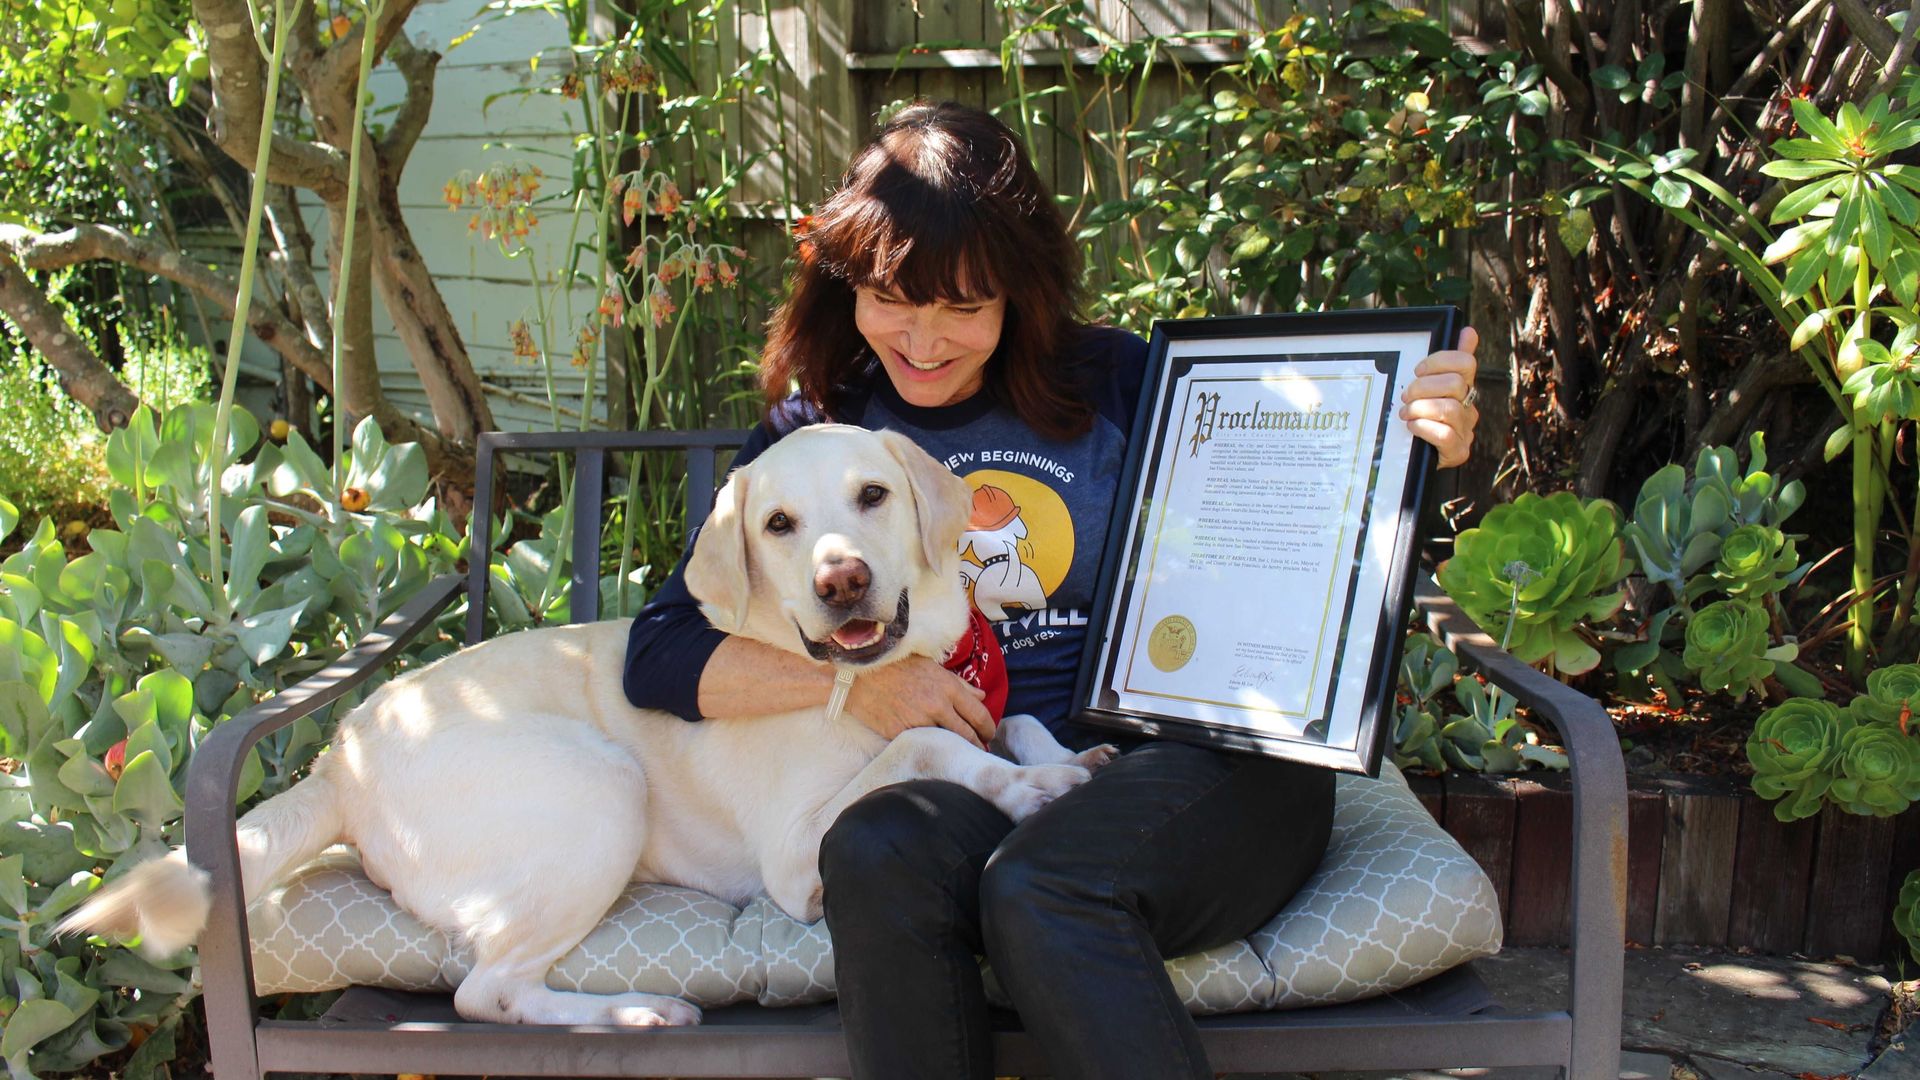 A big cream-colored dog sits on a bench with a human holding a framed proclamation.